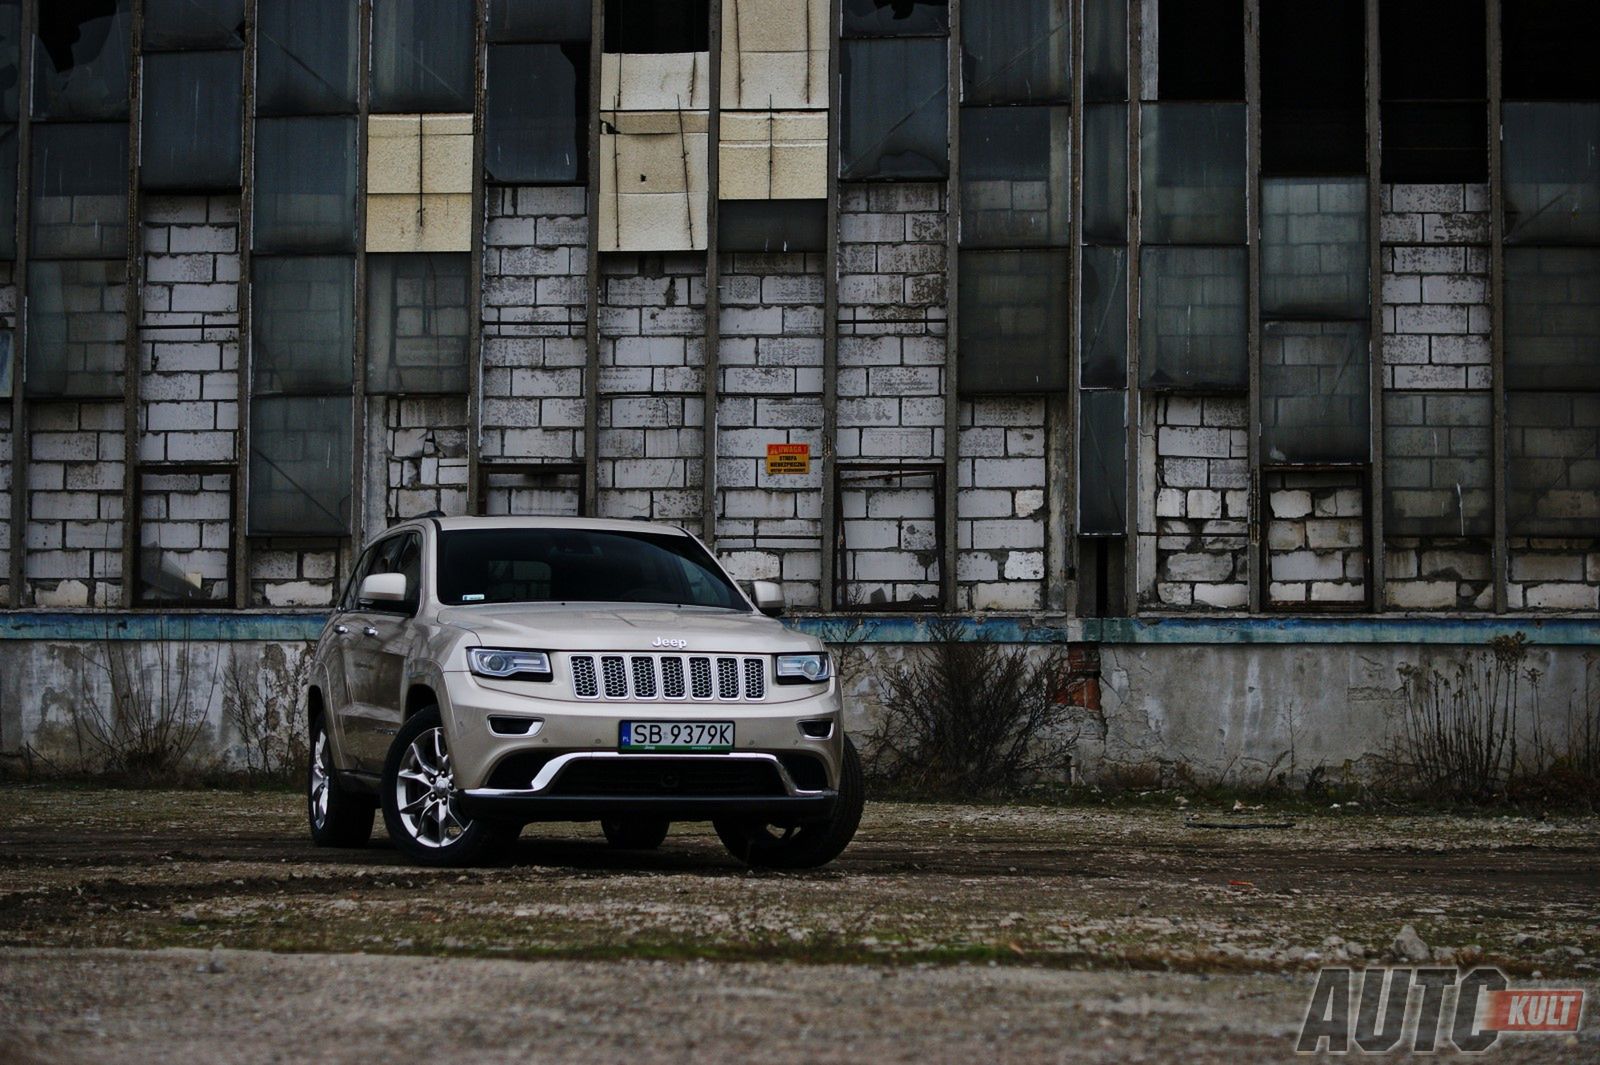 Nowy Jeep Grand Cherokee V6 3,0 Crd - Test | Autokult.pl